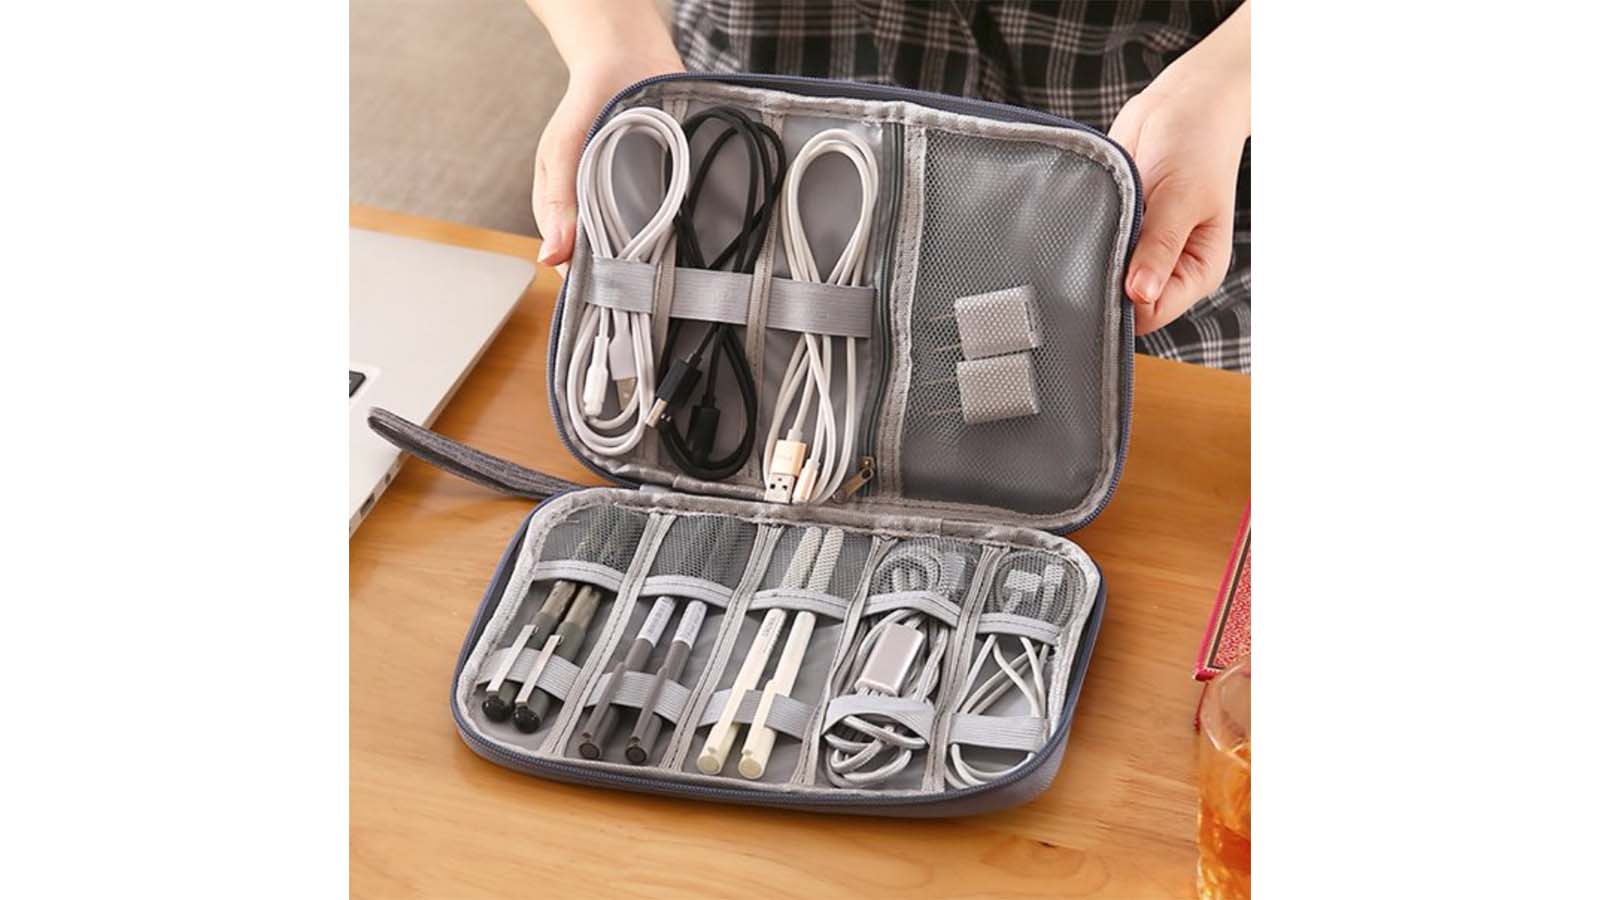  Electronics Travel Organizer-3 Layer Travel Cable